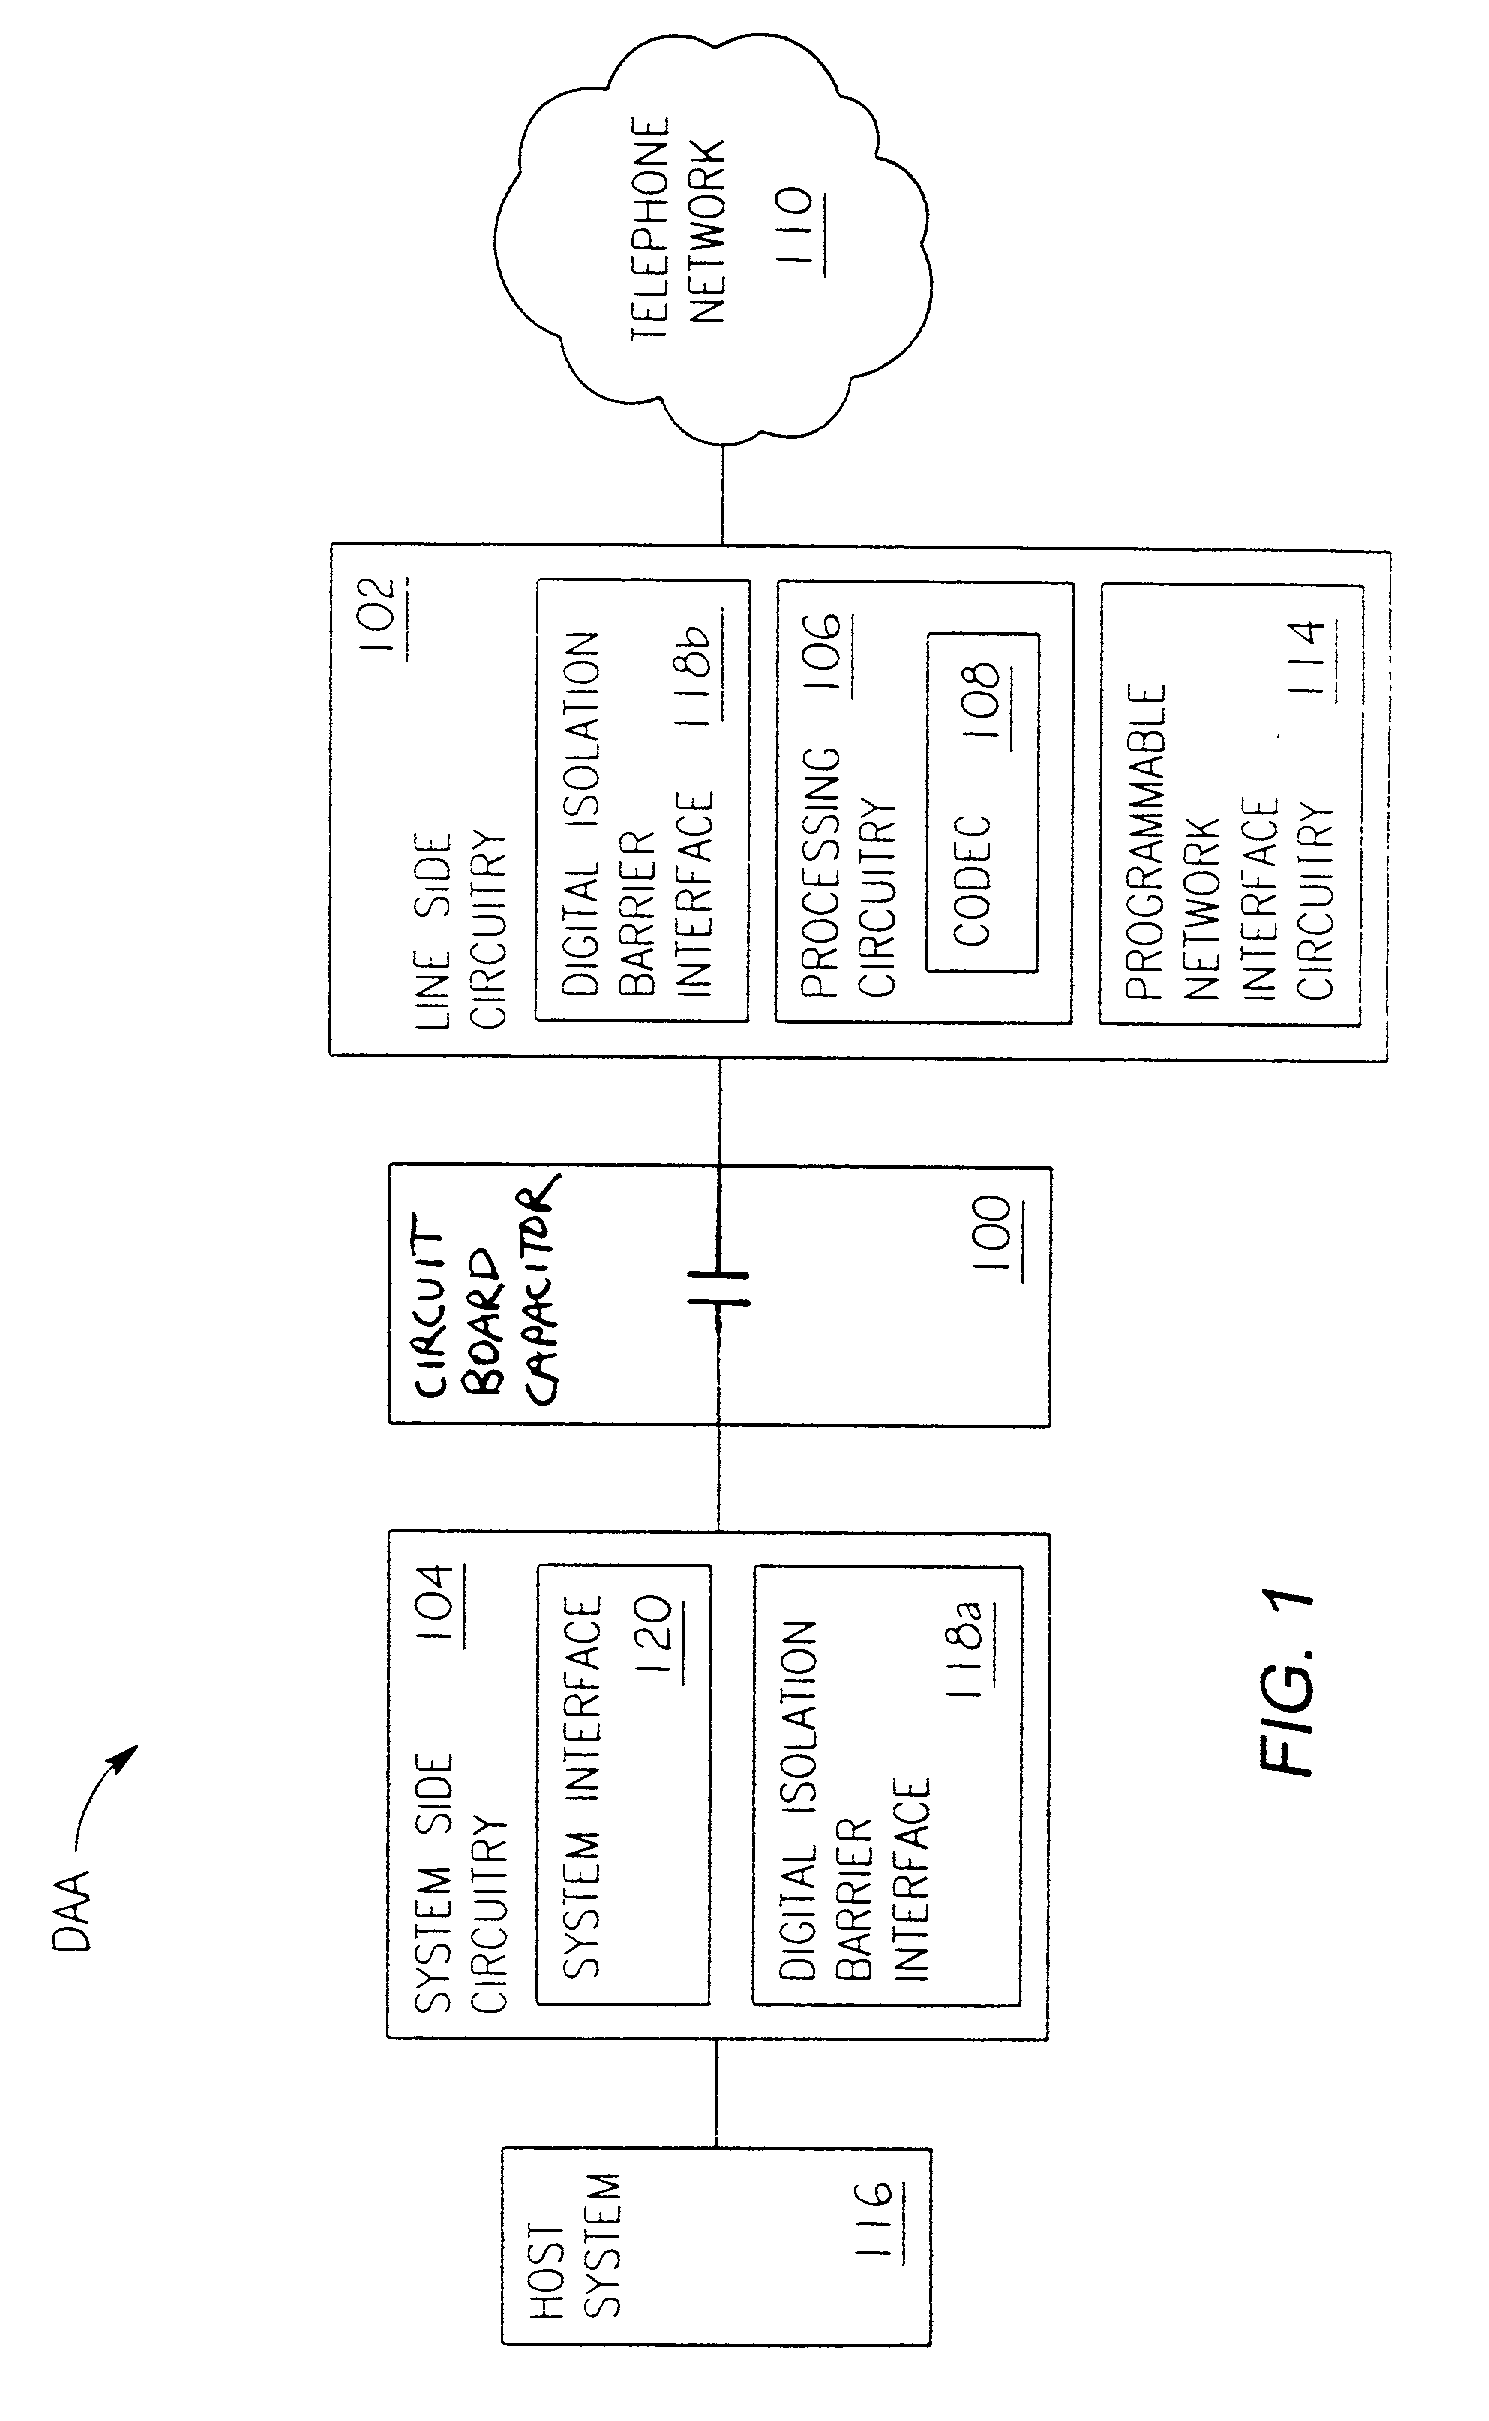 Circuit board capacitor structure for forming a high voltage isolation barrier